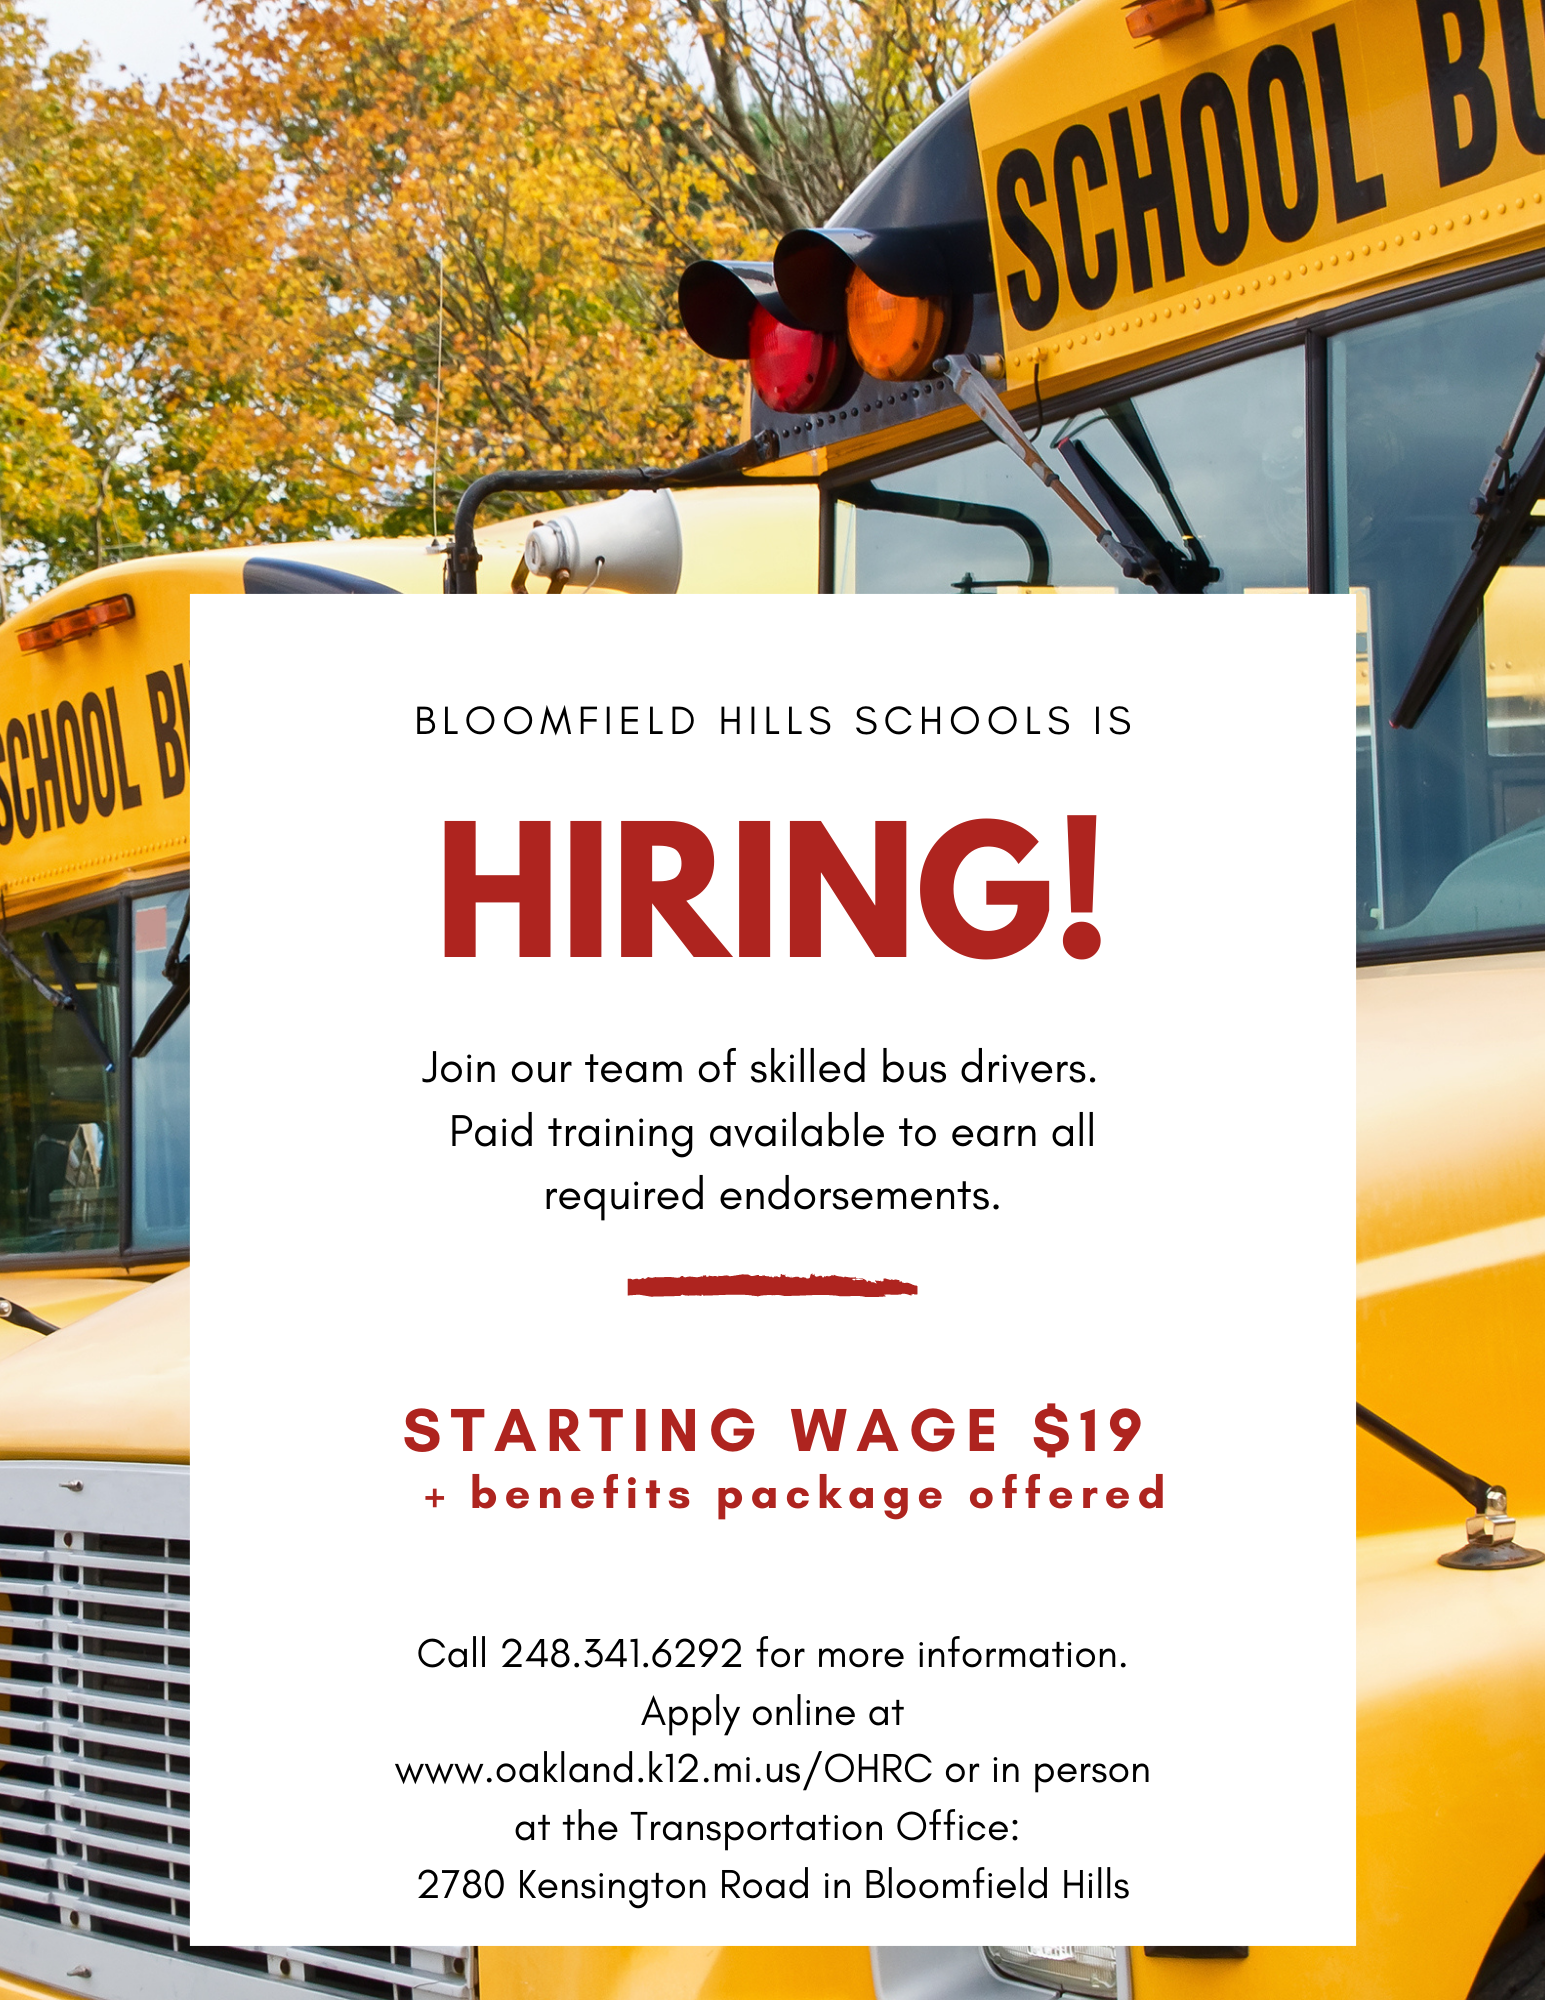 Our BHS bus drivers help make learning come alive for our district students by transporting students safely to and from our farm- and nature-based learning environments. Spread the word! We are now hiring for the 2022-23 school year. Make a difference and connect with the community by joining our transportation team.